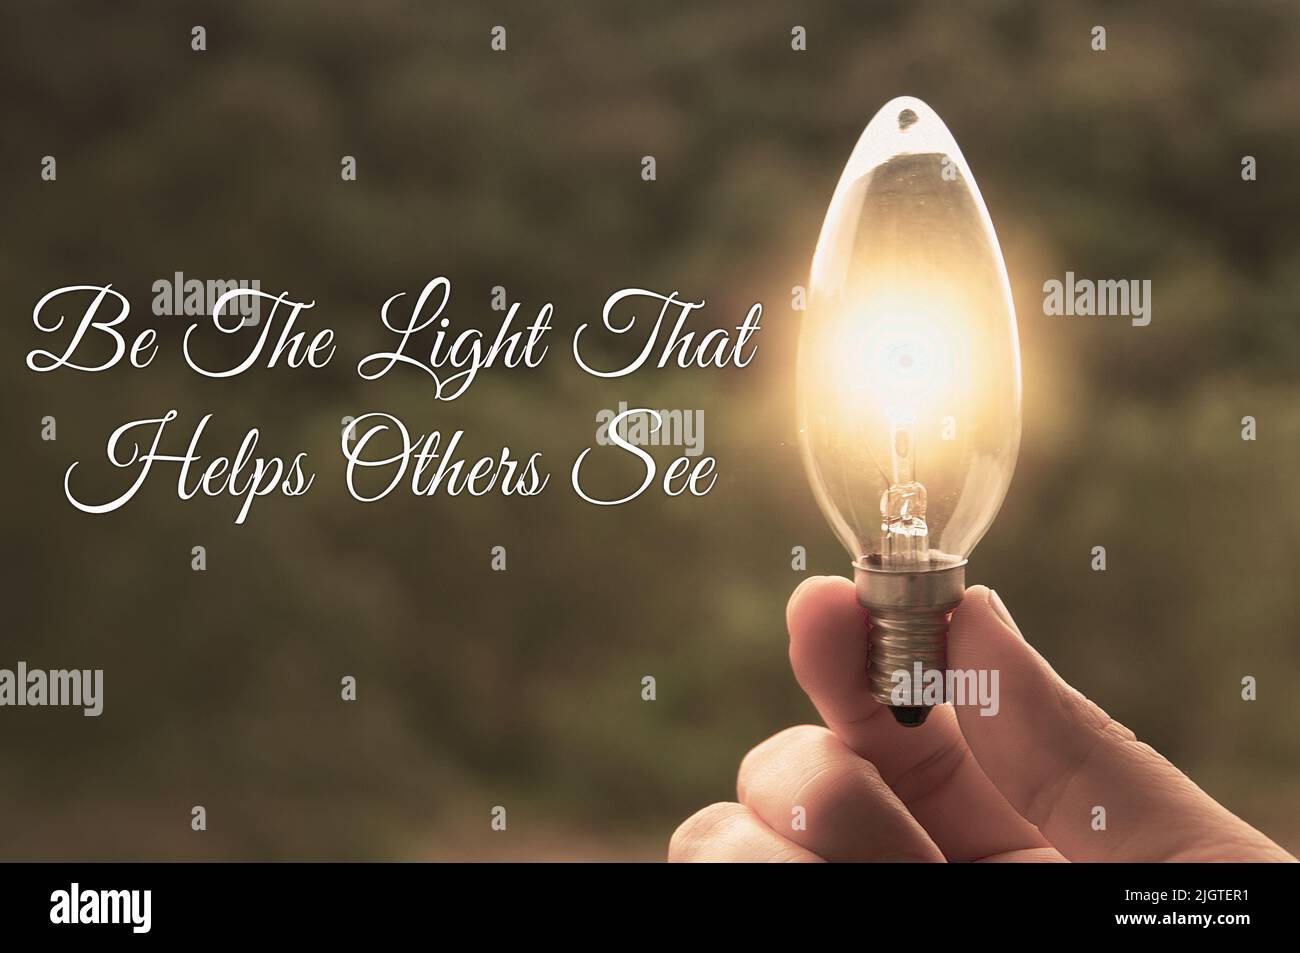 Motivational and Inspirational quote - Be the light that helps others see. With light bulb in vintage color background. Motivational concept Stock Photo